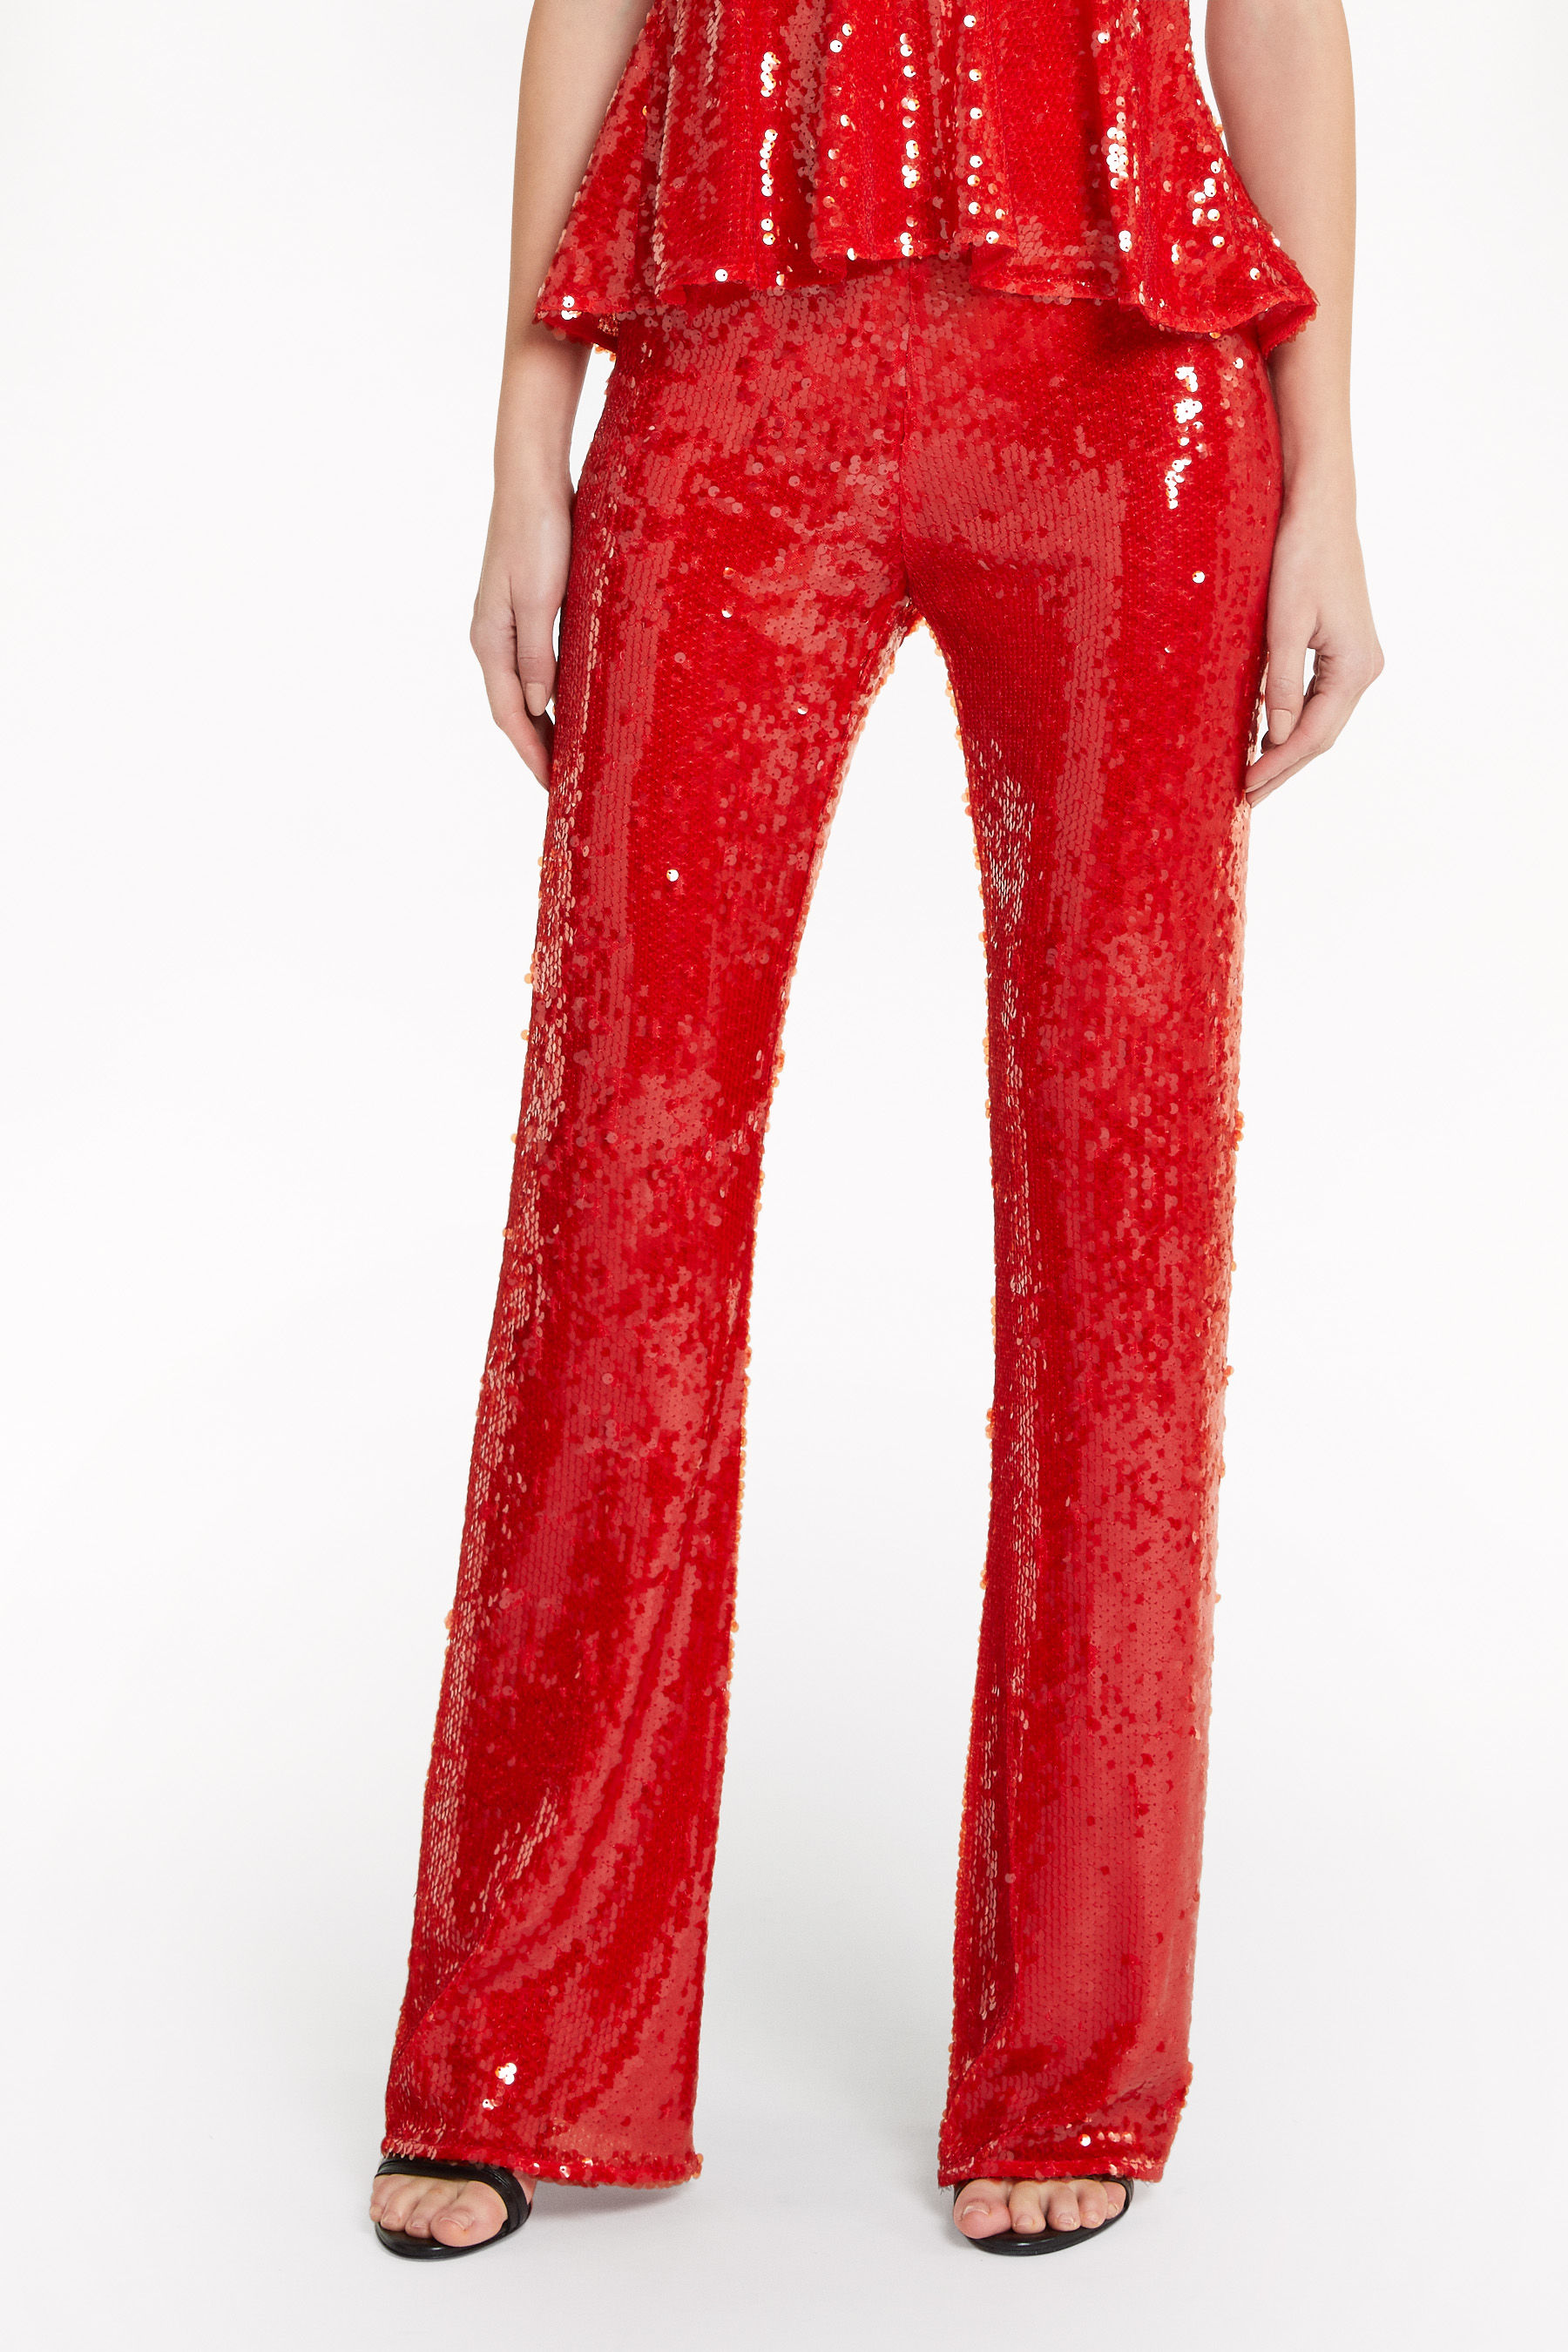 Details more than 71 red sequin trousers best - in.duhocakina